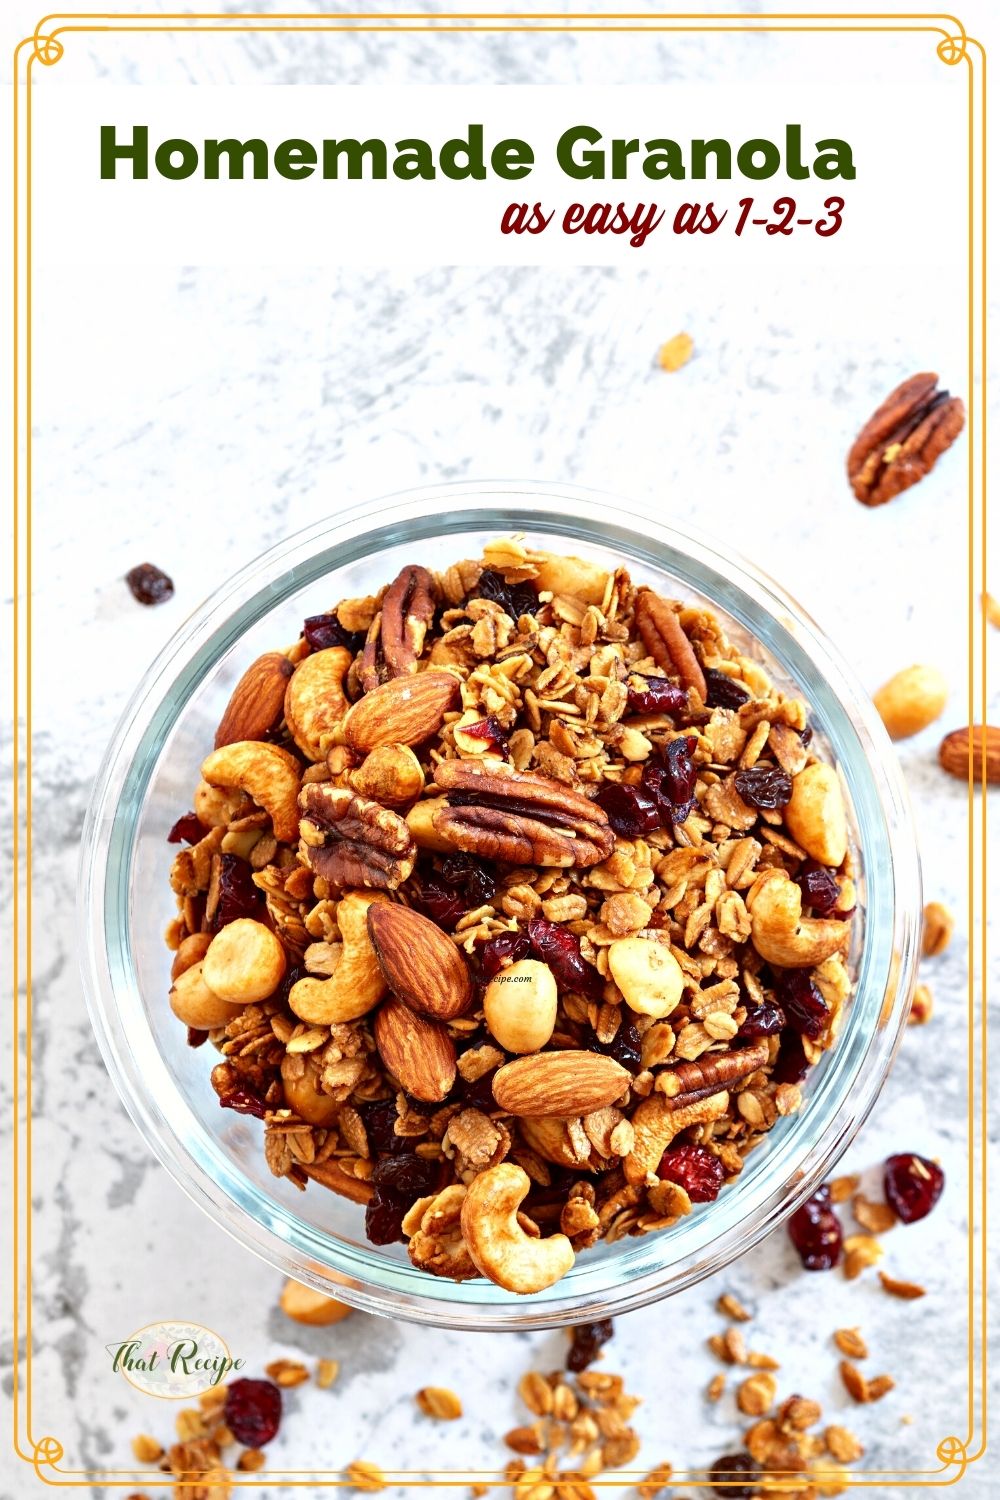 jar filled with granola and text overlay "Homemade Granola easy as 1-2-3"